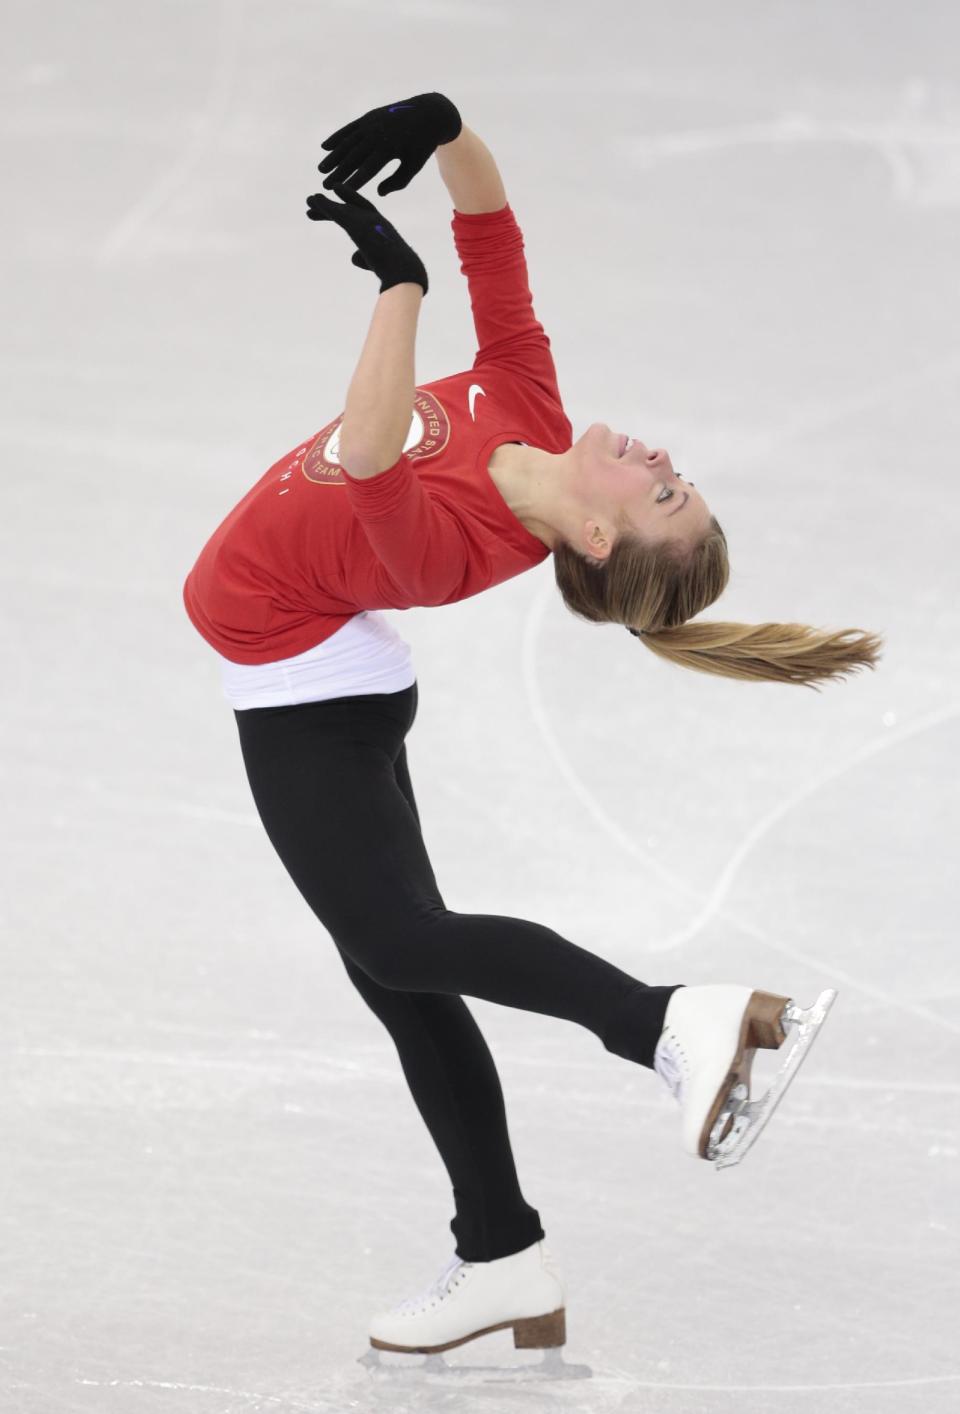 Ashley Wagner, of the United States, skates at the figure stating practice rink ahead of the 2014 Winter Olympics, Wednesday, Feb. 5, 2014, in Sochi, Russia. (AP Photo/Ivan Sekretarev)